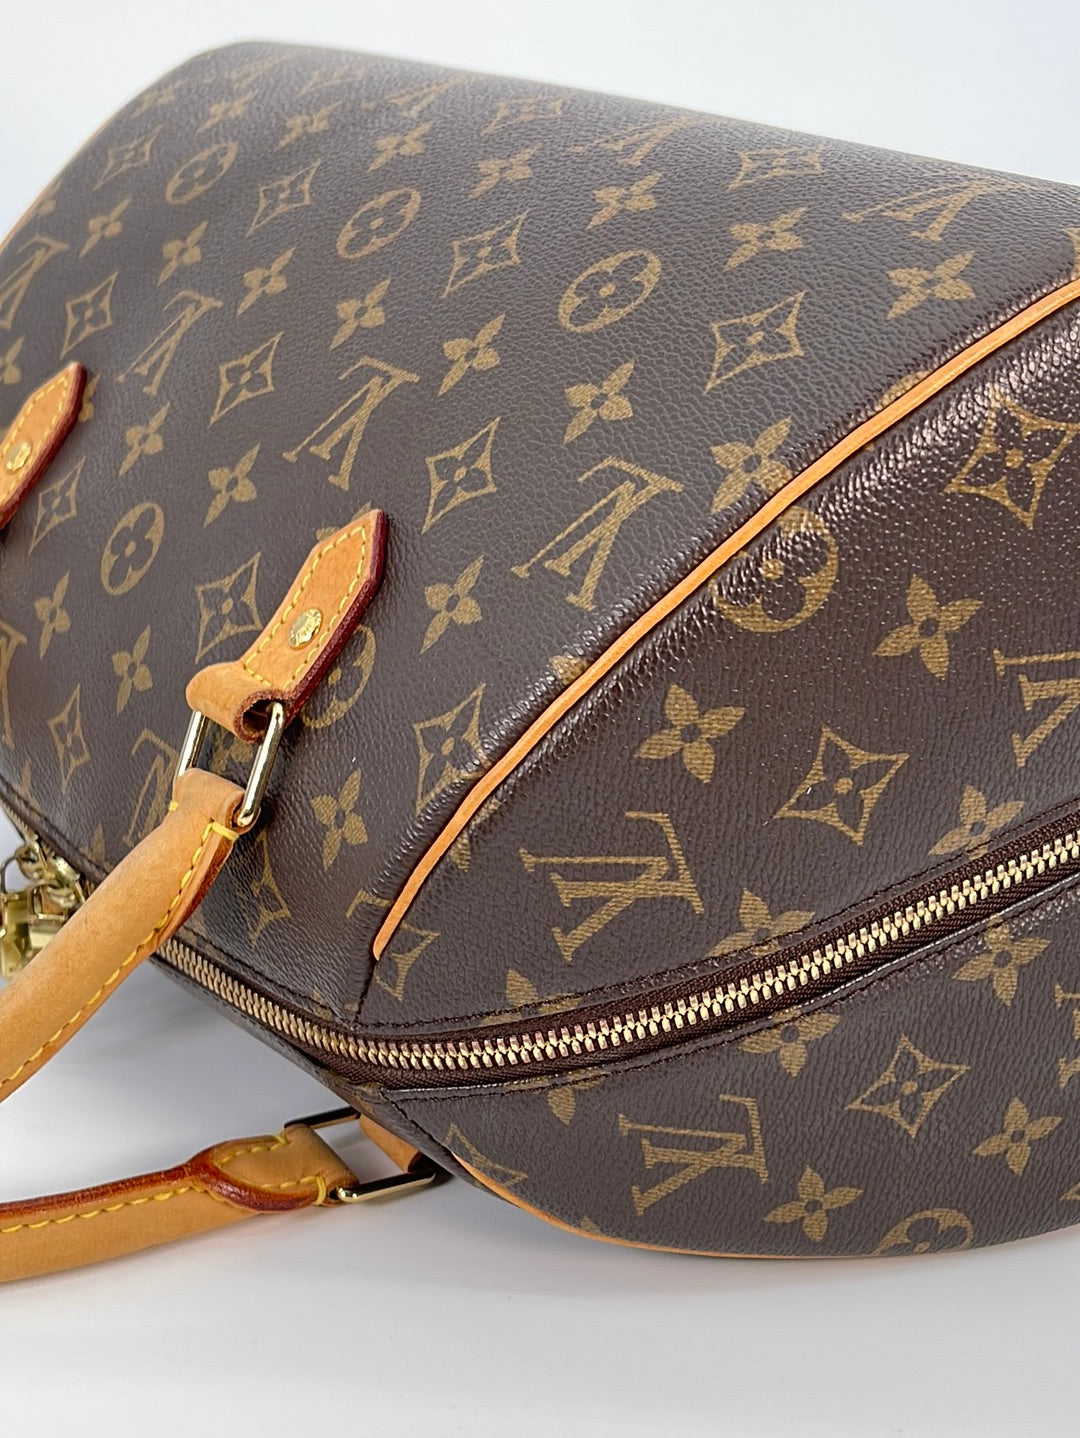 Pre-owned Louis Vuitton 2006 Rivera Mm Tote Bag In 褐色